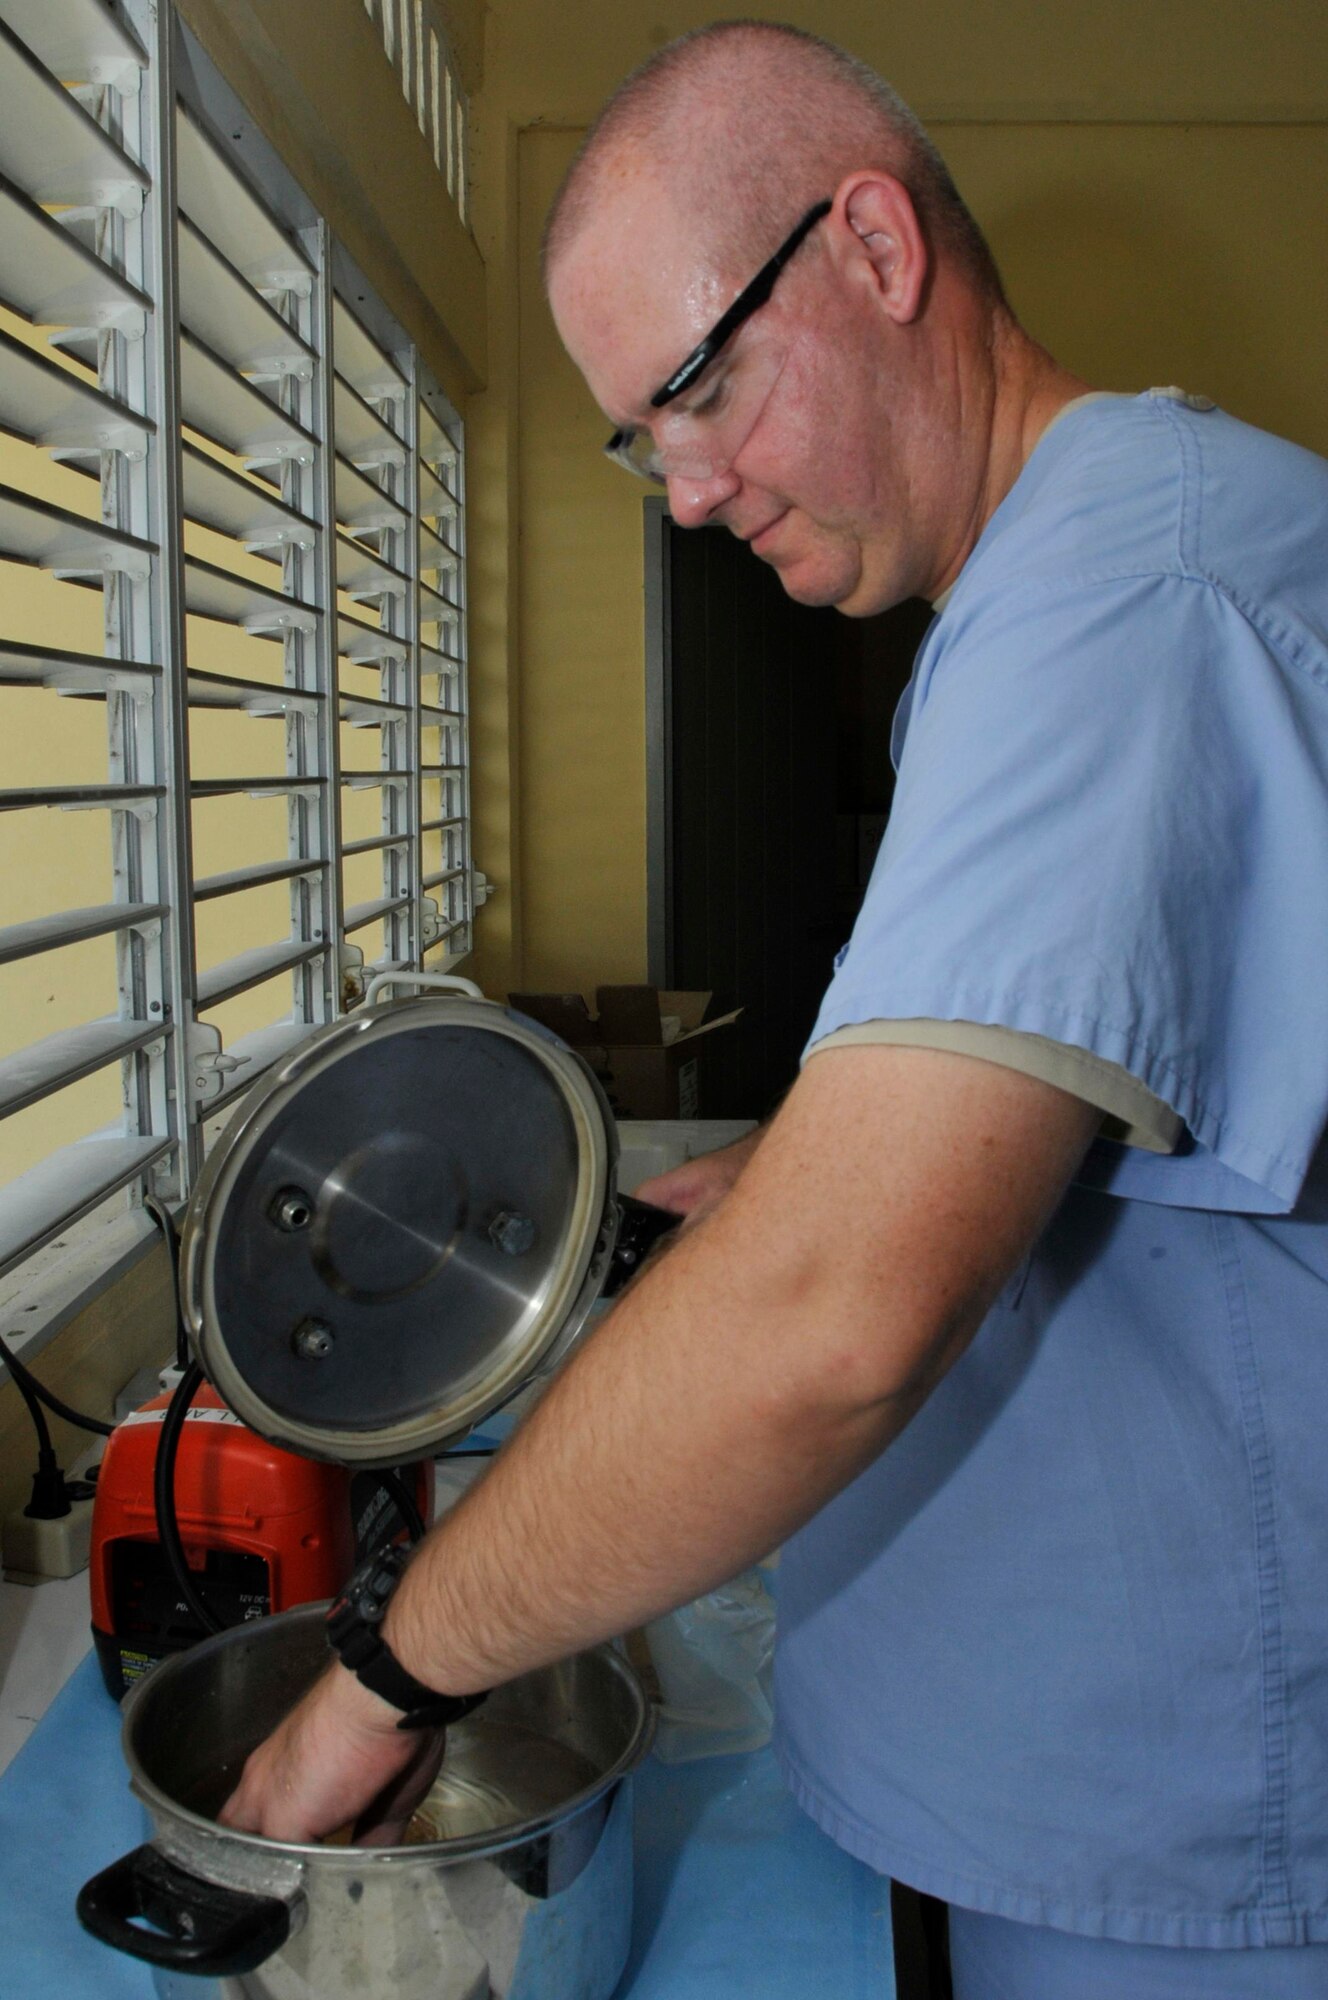 Tech Sgt. Brian Arendes, dental laboratory technician, 75th Dental Squadron, Hill AFB, Utah, sets dentures into pressure cooker filled with water, to harden Aug. 25, 2009, at Diamond Secondary School in Georgetown, Guyana. Airmen from Hill AFB are participating in the third and final dental rotation for New Horizons Guyana 2009. (U.S. Air Force photo by Airman 1st Class Perry Aston) (Released)